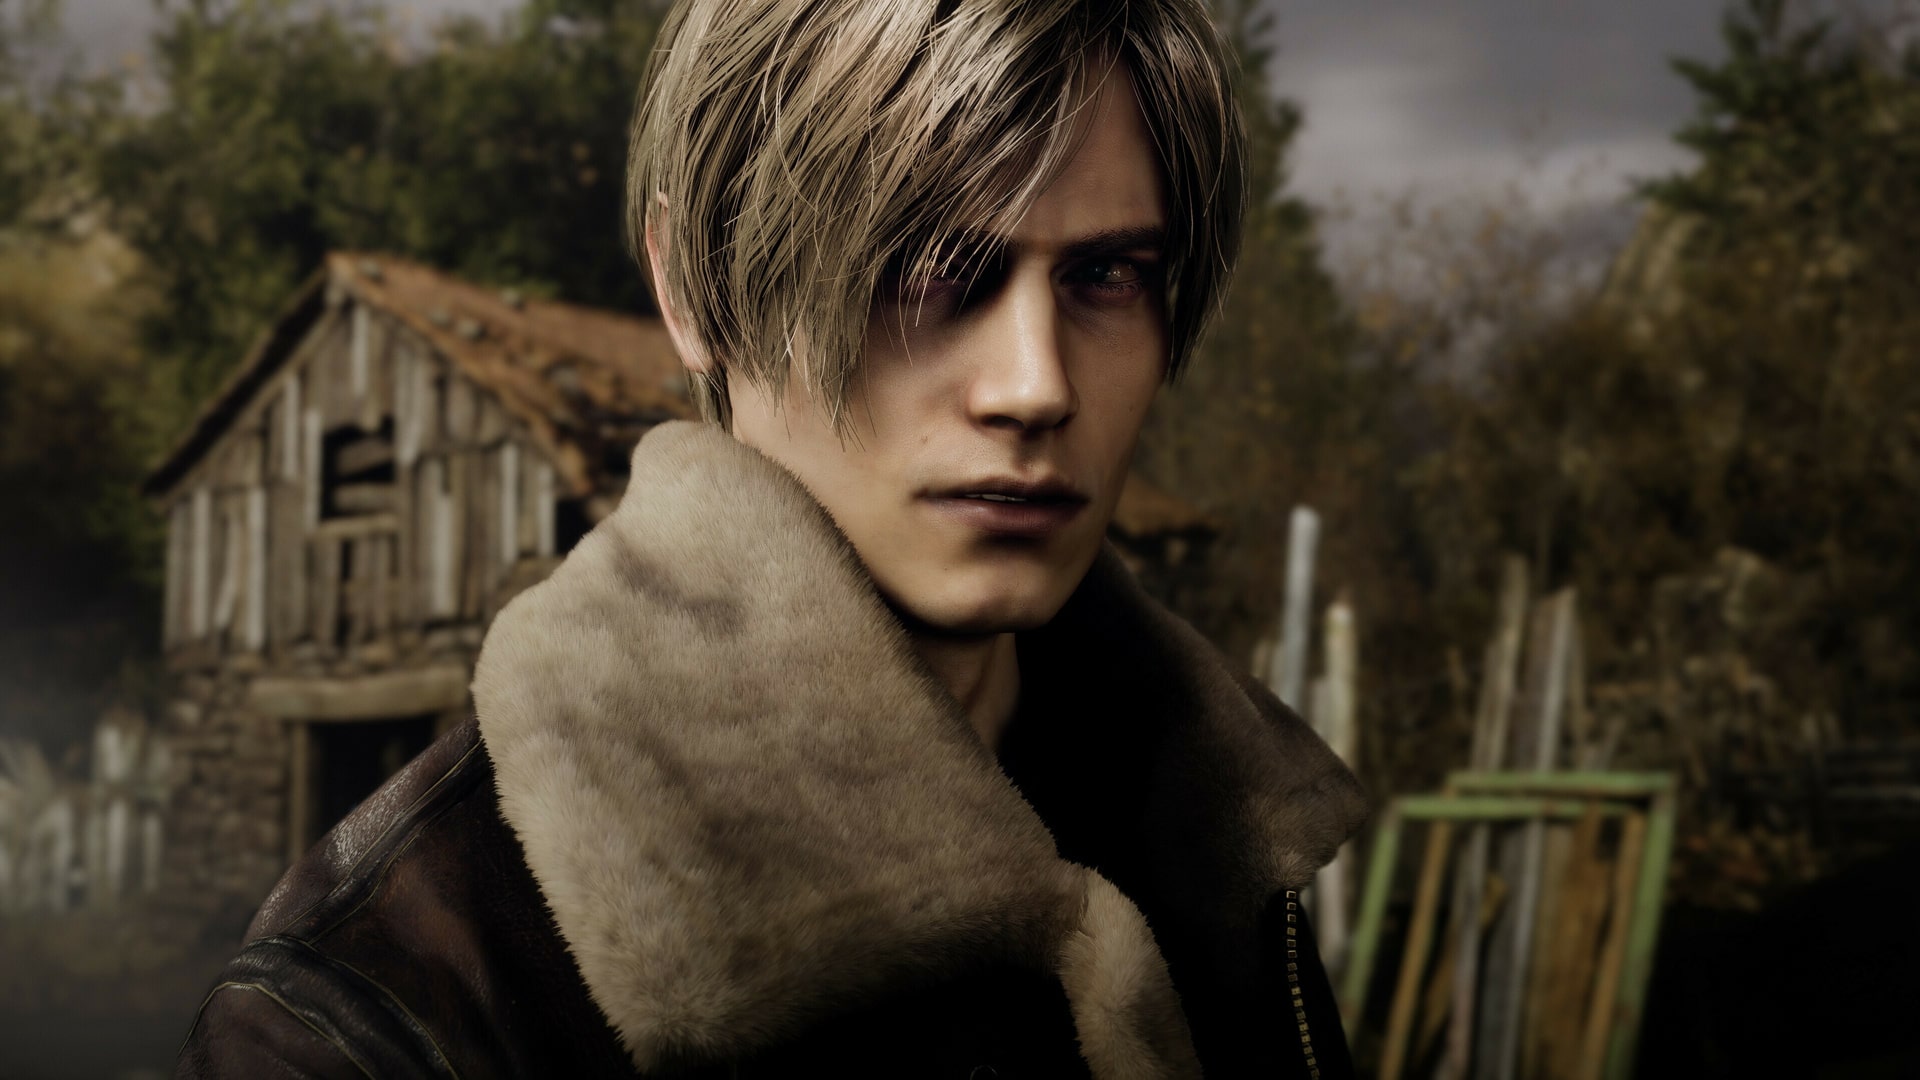 Portrait of Leon S. Kennedy from Resident Evil 4 in his iconic look